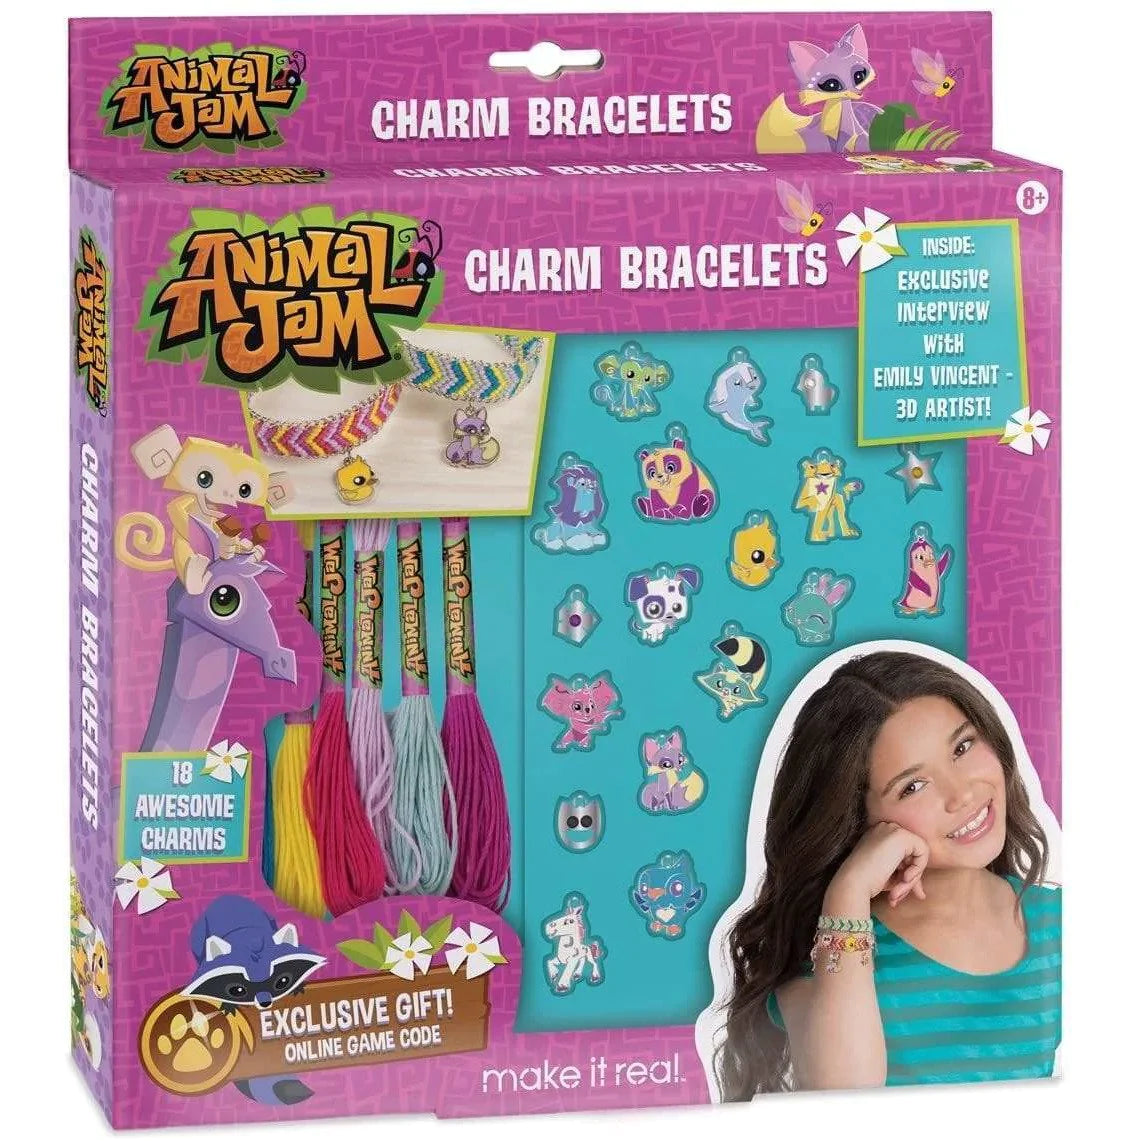 Make It Real - Animal Jam Charm Bracelets. DIY Animal Jam Themed Charm Bracelet Making Kit for Girls. Arts and Crafts Kit to Create Unique Tween Bracelets with Cord, Chains and Metallic Charms